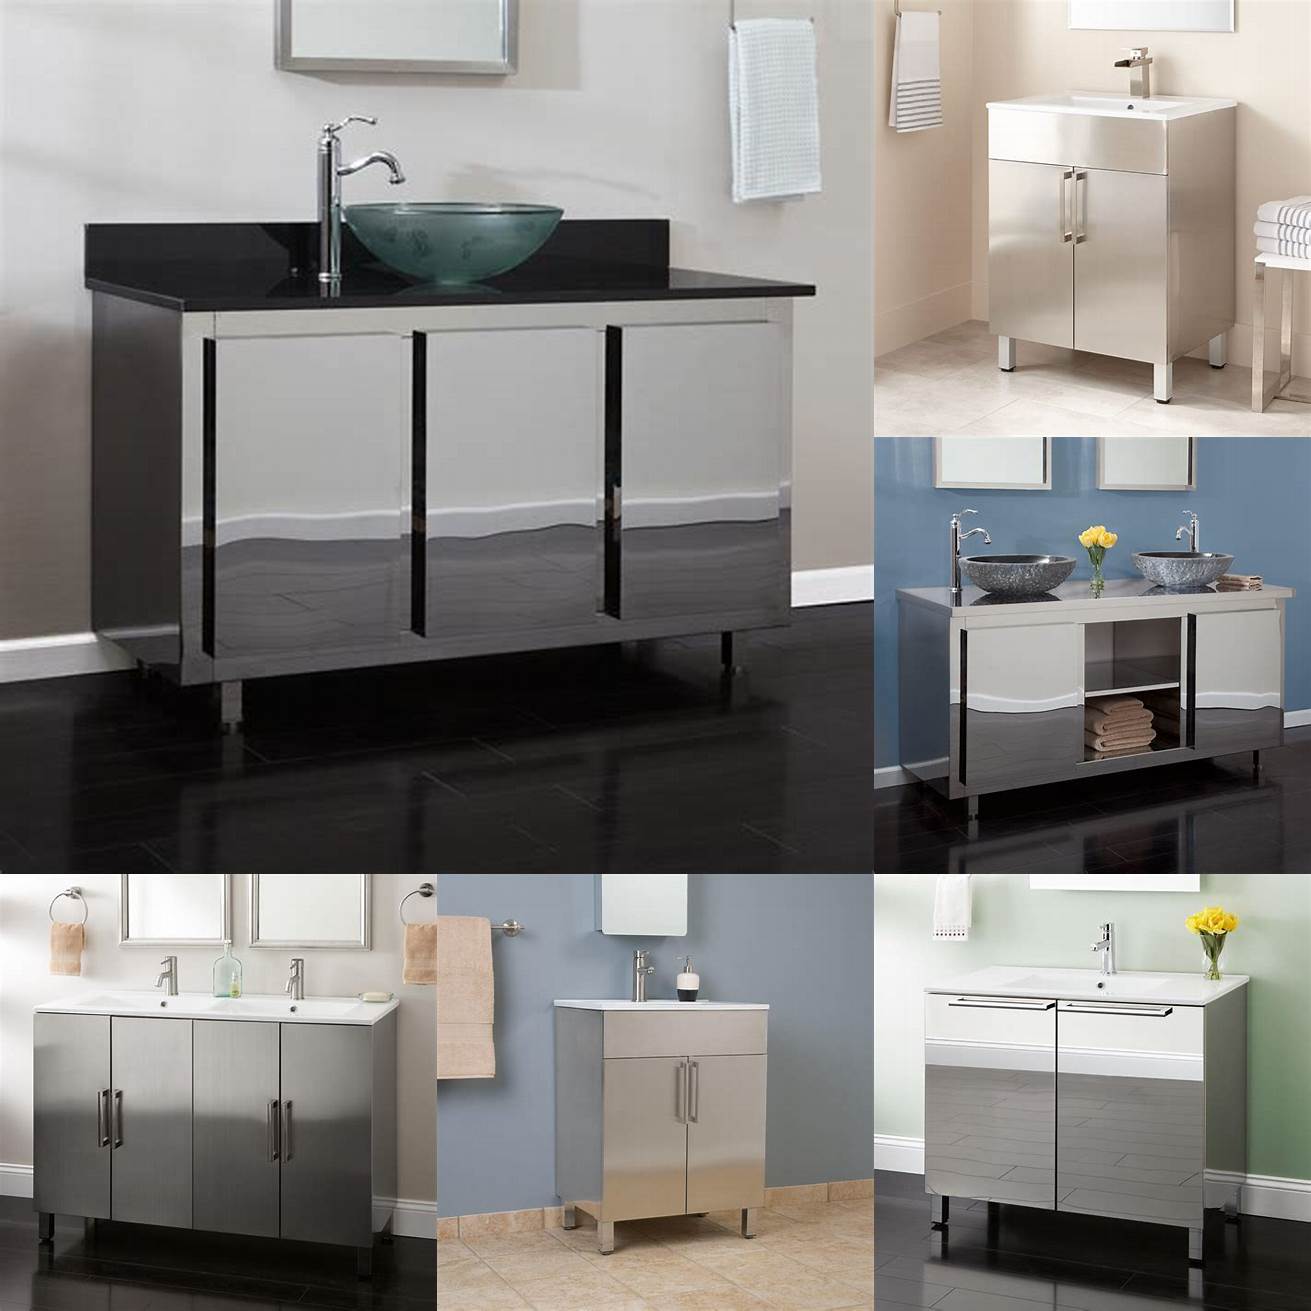 6 This stainless steel vanity adds a modern touch to this sleek bathroom with its brushed finish and closed storage